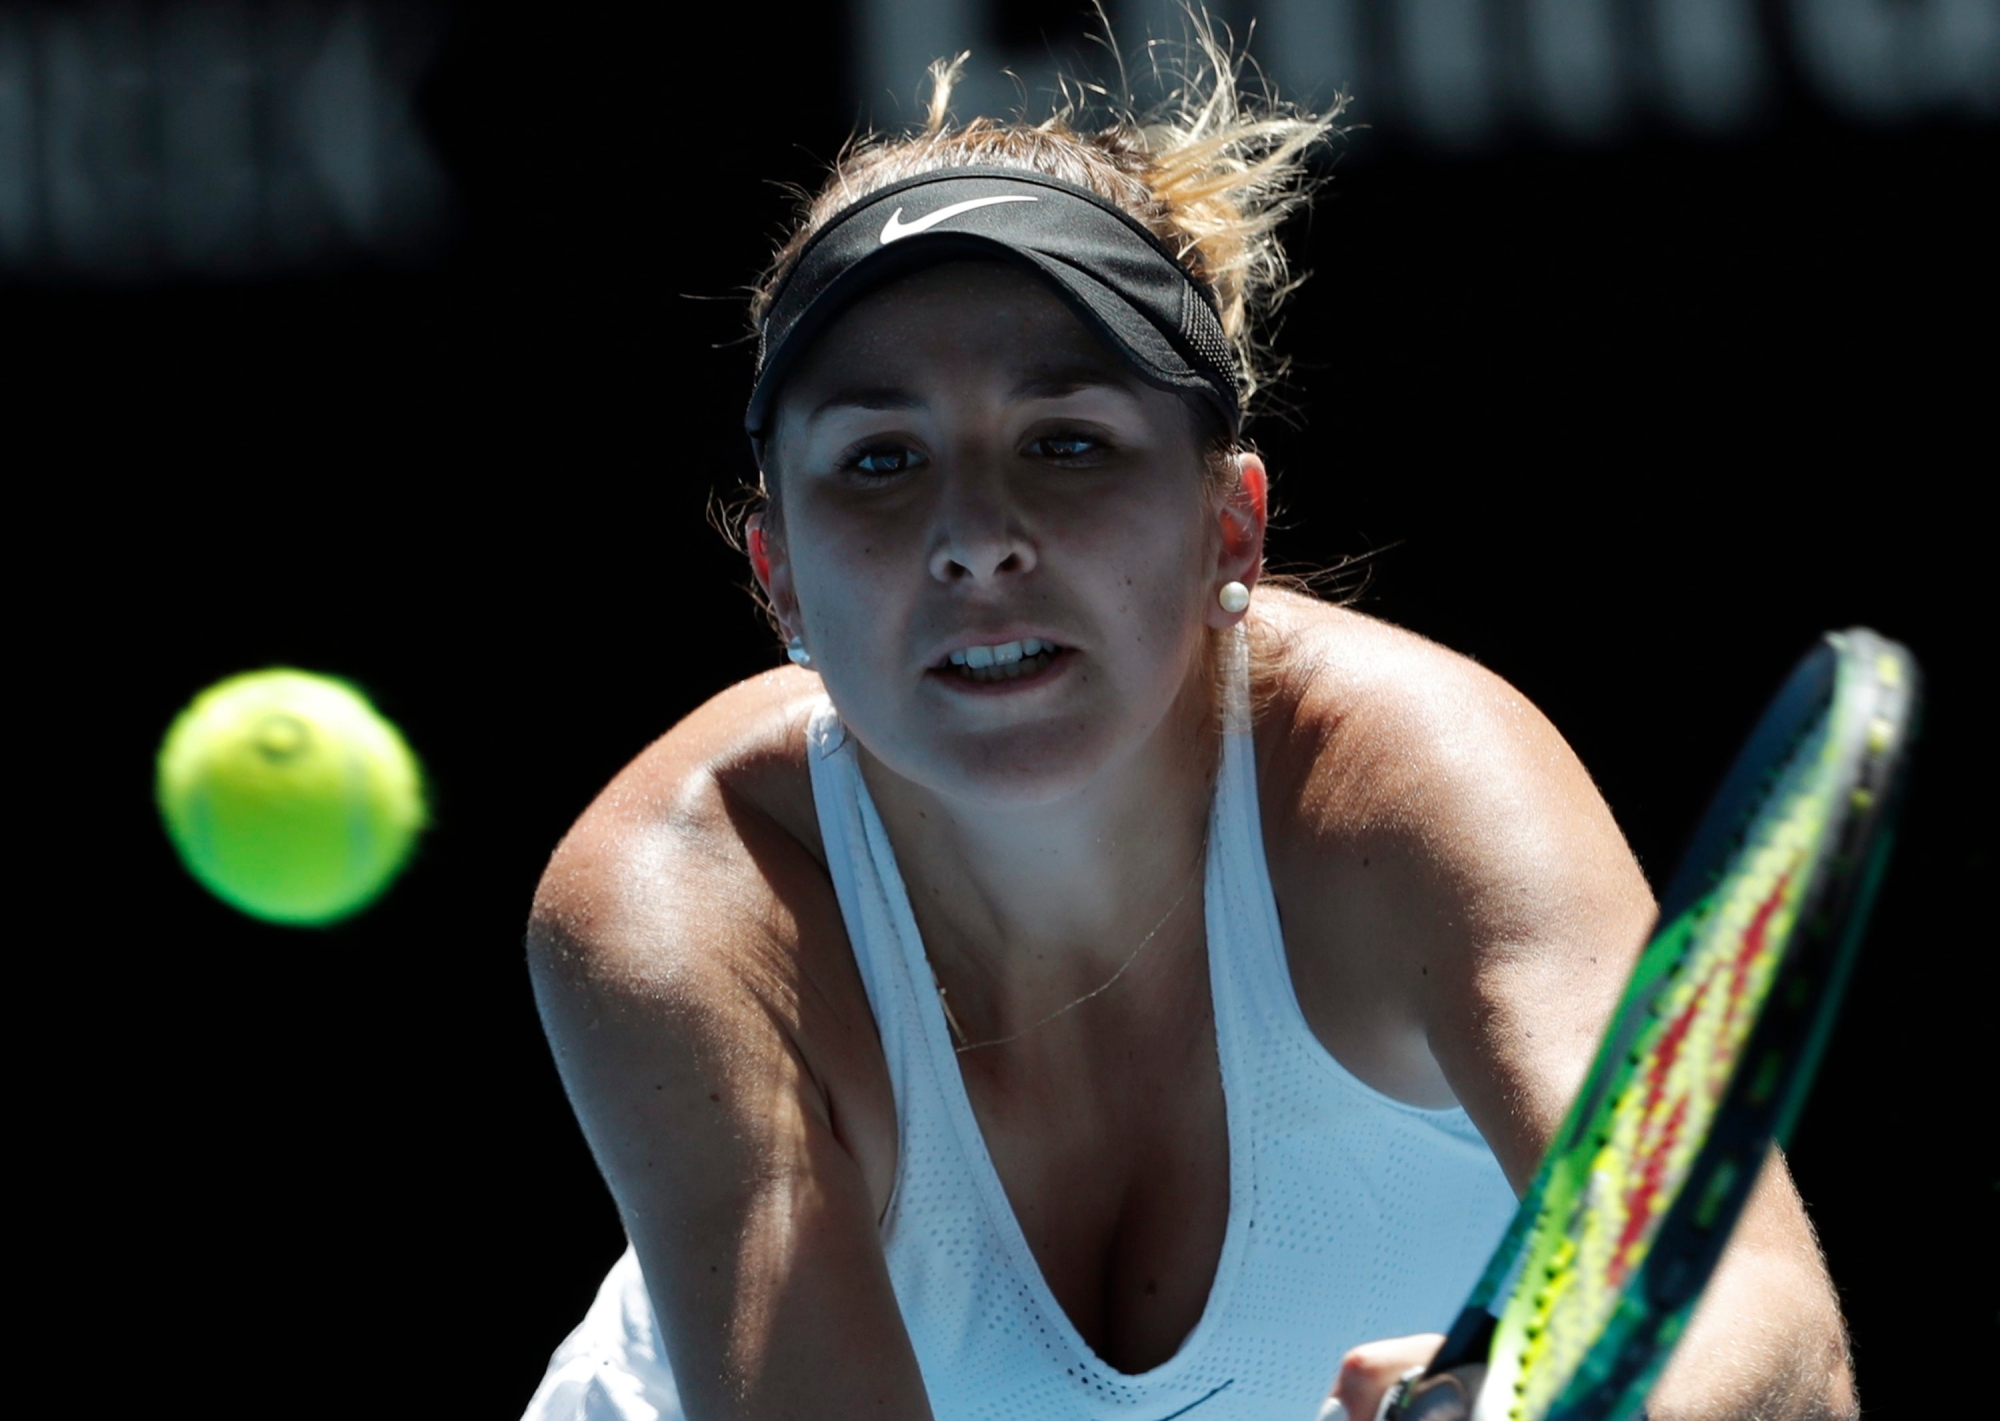 Switzerland's Belinda Bencic keeps eye on the ball for a backhand in a second round match against Thailand's Luksika Kumkhum at the Australian Open tennis championships in Melbourne, Australia, Wednesday, Jan. 17, 2018. (AP Photo/Vincent Thian) AUSTRALIAN OPEN TENNIS